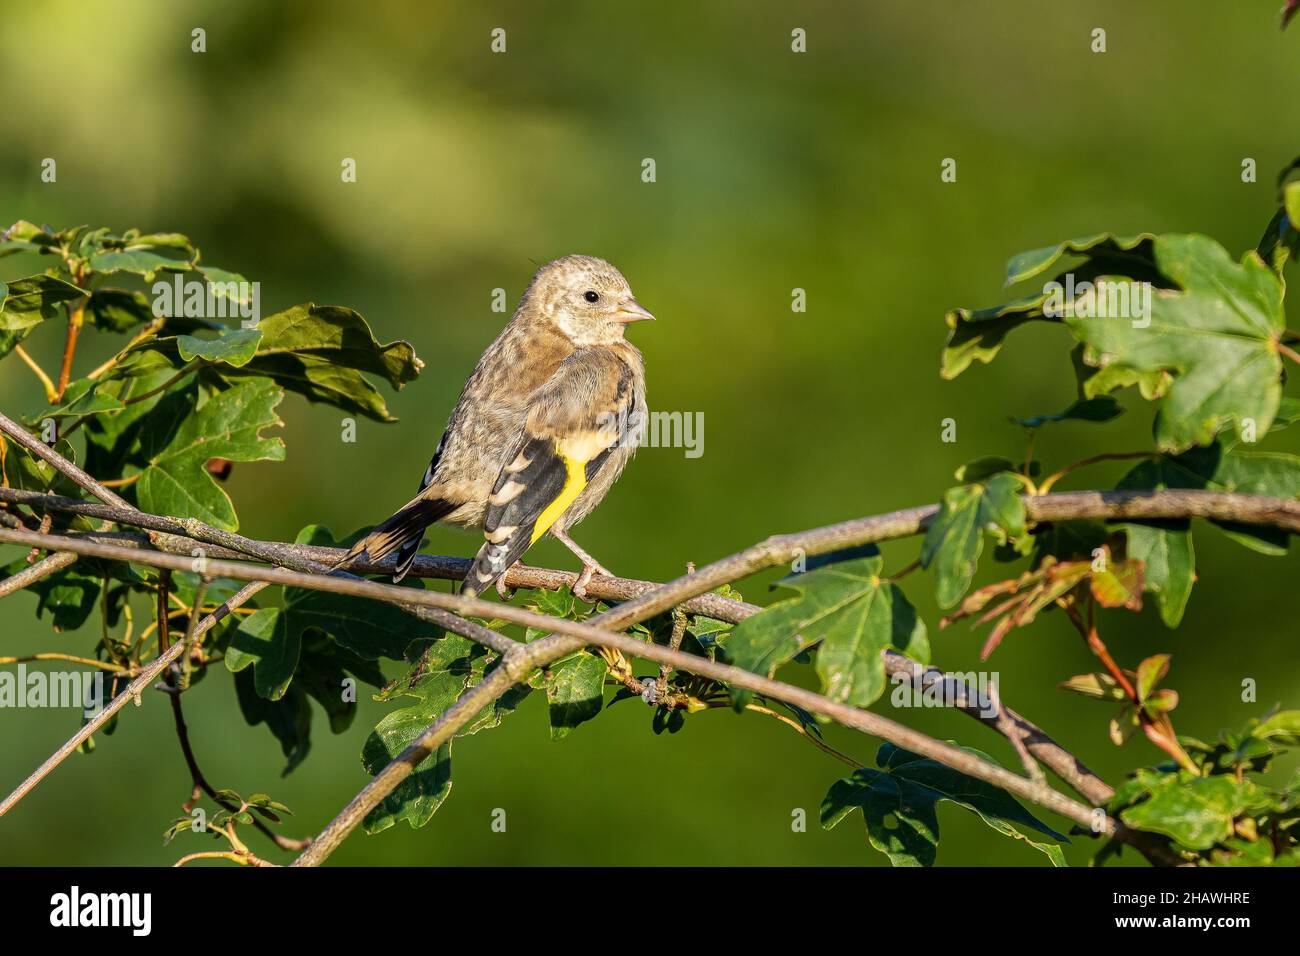 A juvenile goldfinch (Carduelis carduelis) perched in a tree in the Beddington Farmlands nature reserve in Sutton, London. Stock Photo